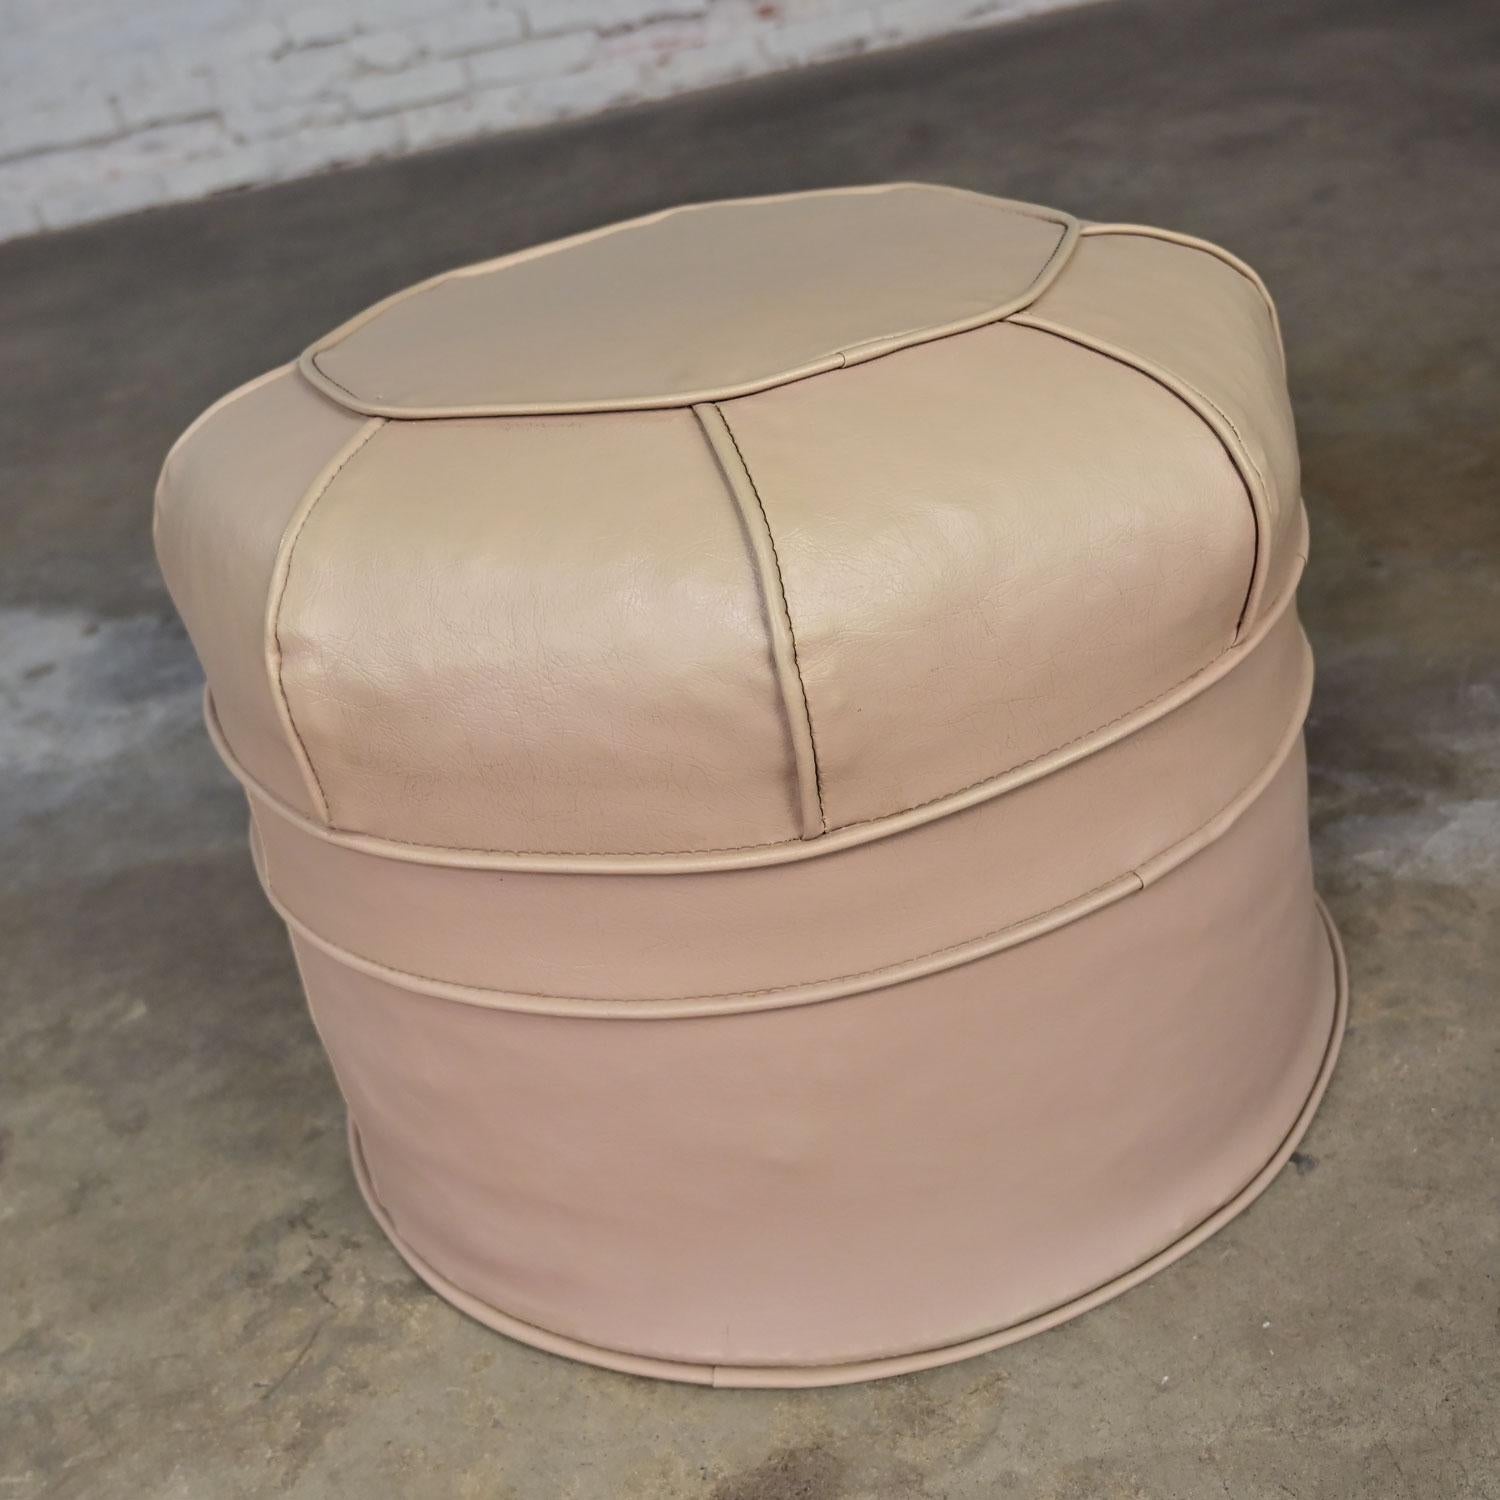 Awesome vintage Mid-Century Modern beige faux leather or vinyl octagonal hassock, ottoman, or footstool. Beautiful condition, keeping in mind that this is vintage and not new so will have signs of use and wear. We have found no outstanding flaws.